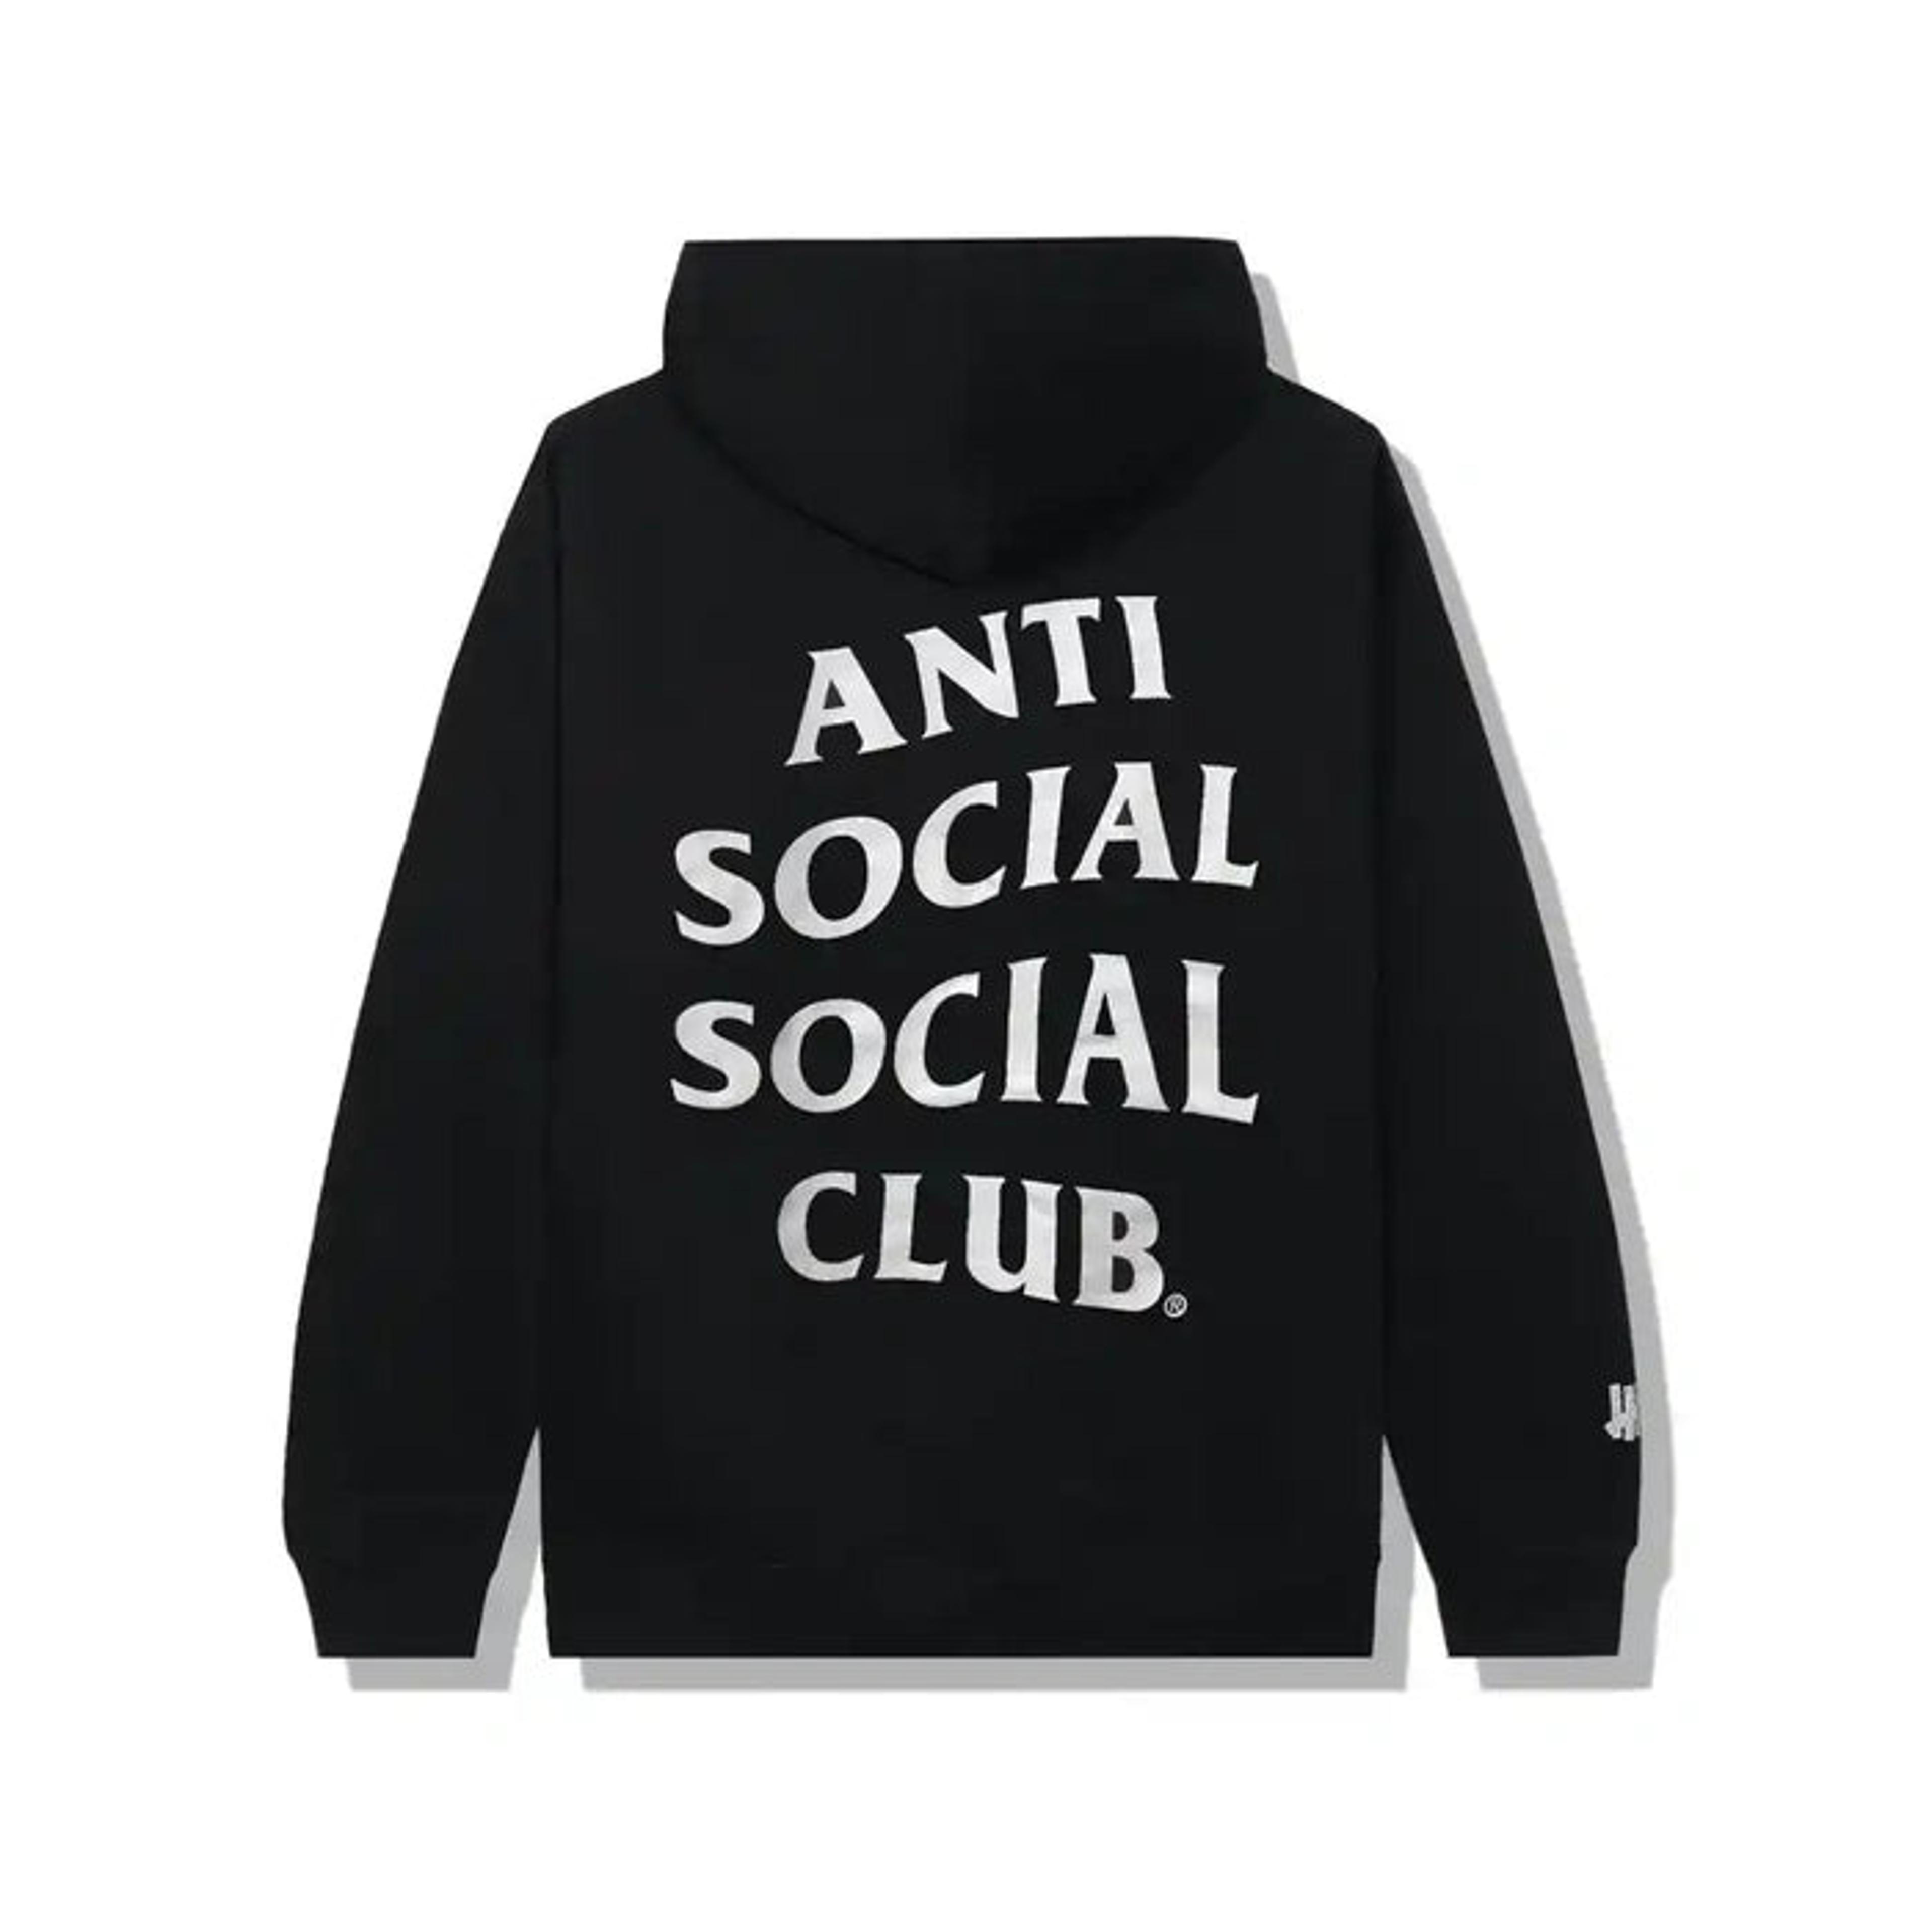 Alternate View 1 of Anti Social Social Club X Undefeated Paranoid Black Hoodie ASSC 